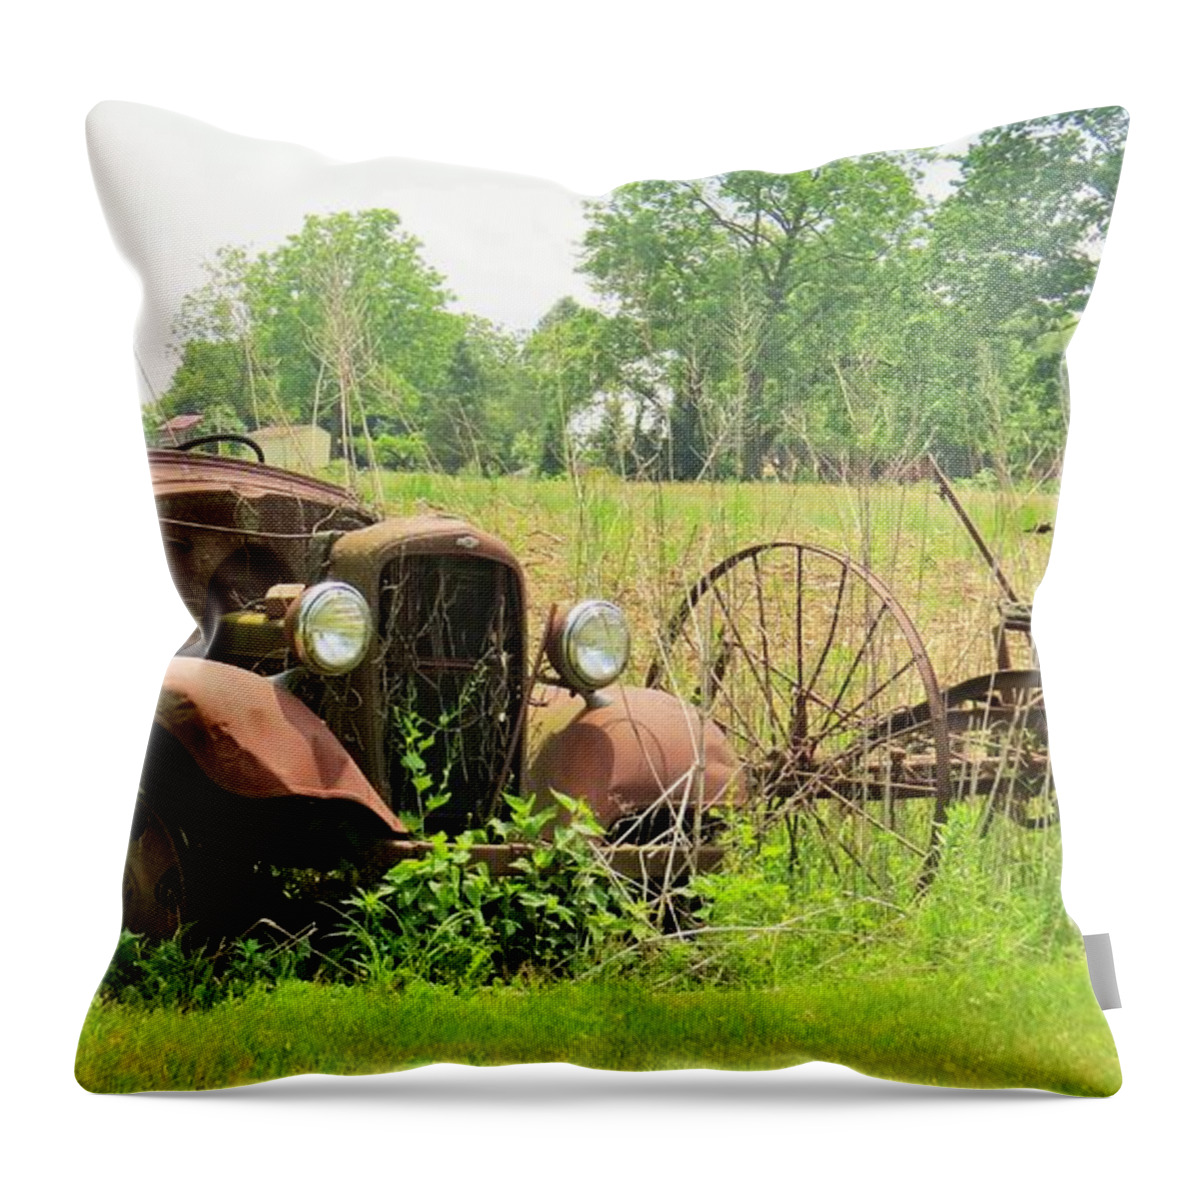 Old Car Throw Pillow featuring the photograph Saw Better Days by Jeanette Oberholtzer